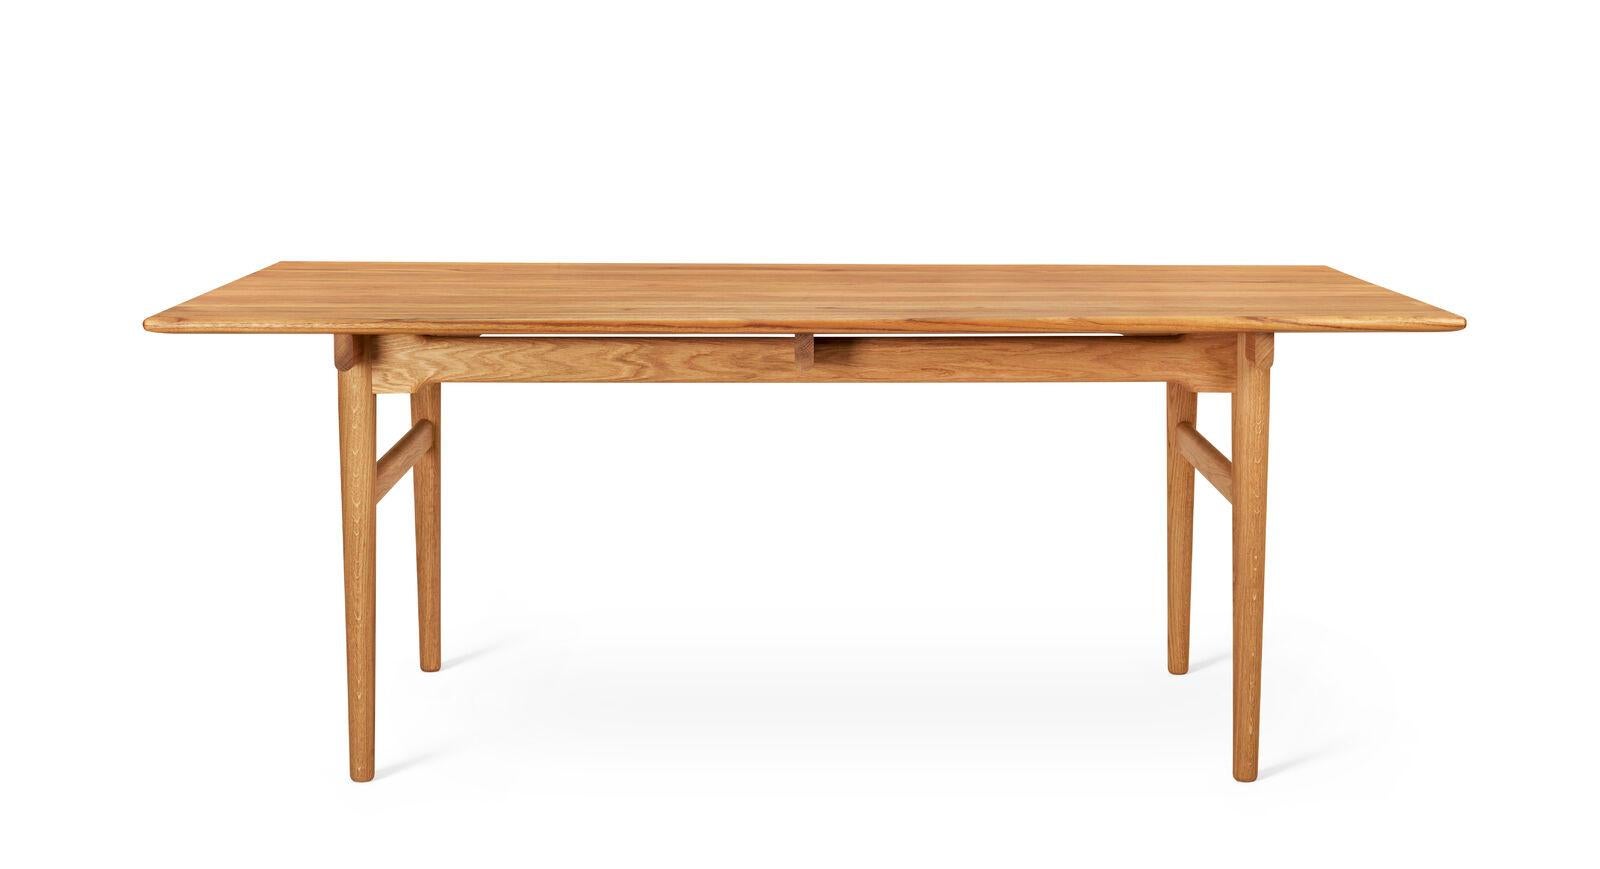 Hans J. Wegner’s CH327 6-person dining table from 1962 has an unusual design where the tabletop appears almost to be floating. The CH327T leaf is sold separately. Please inquire for more details.